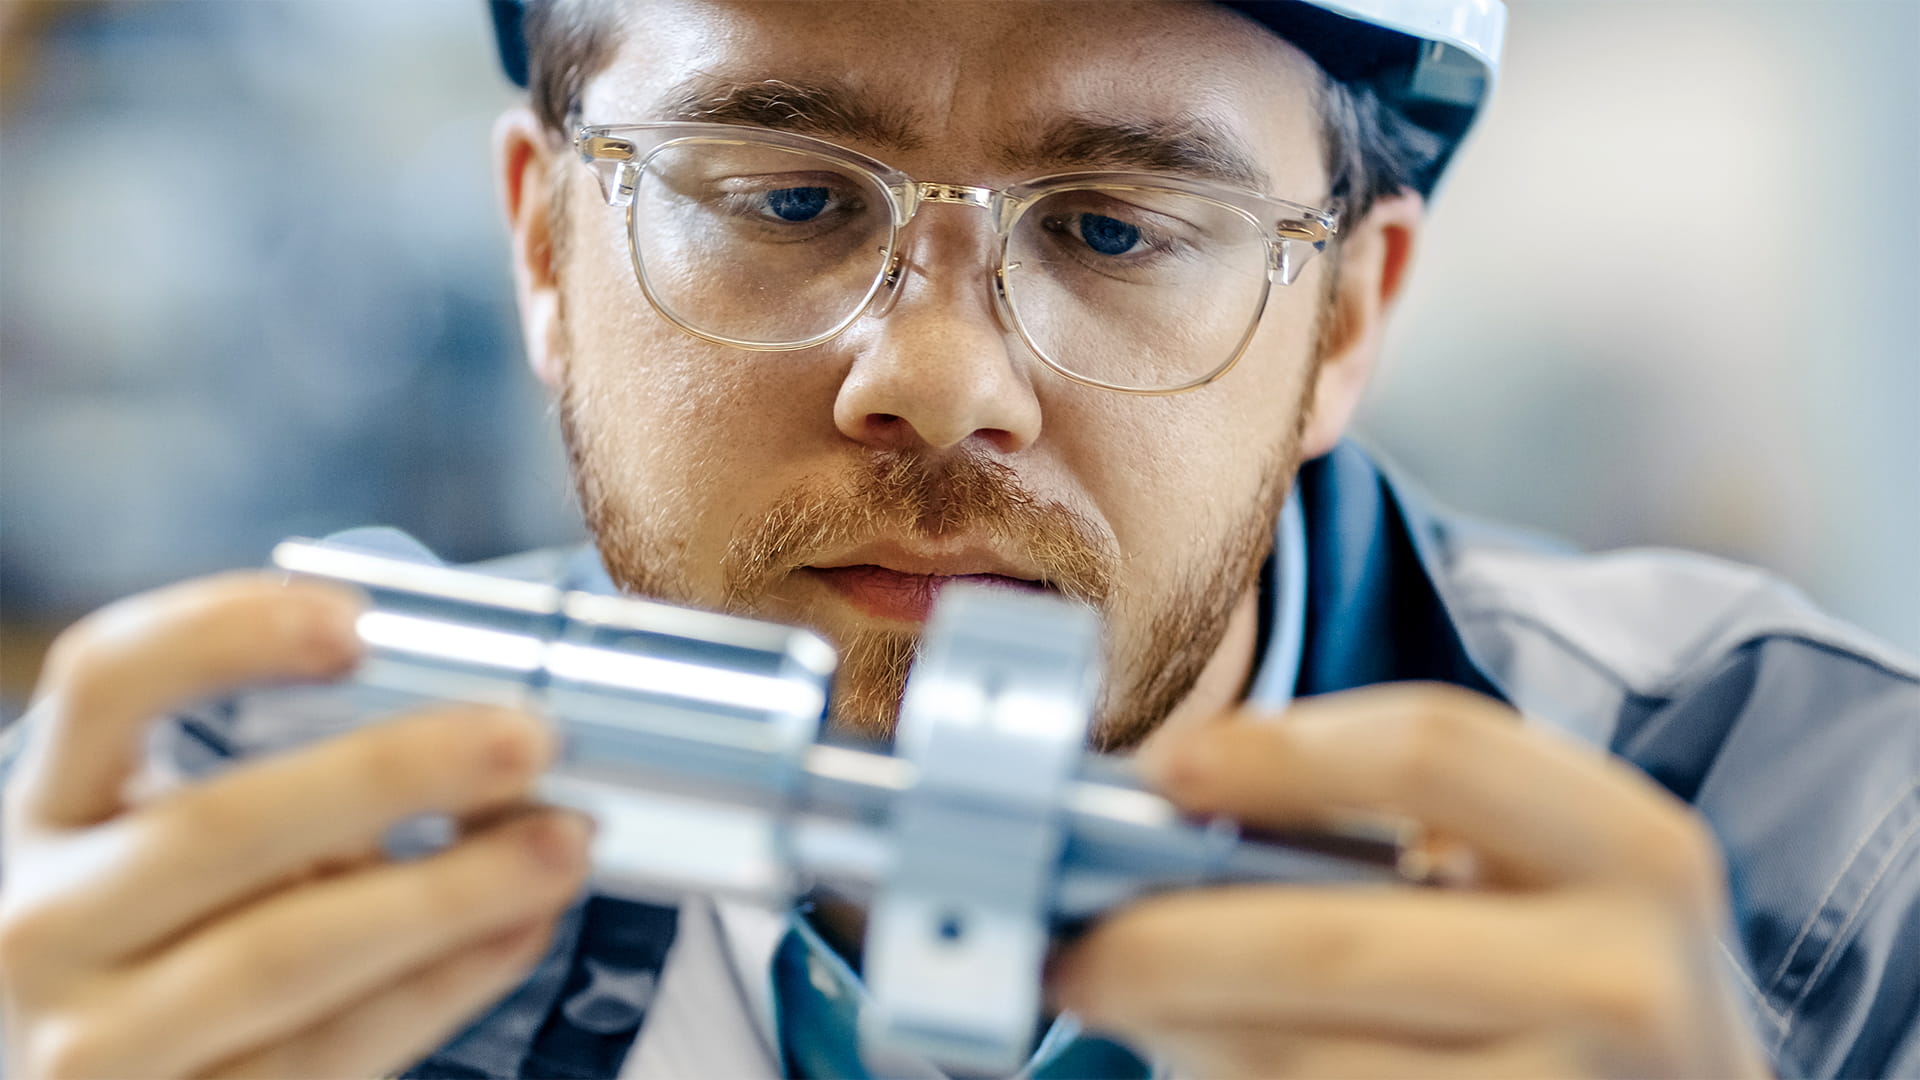 Close-up shot of an industrial engineer wearing glasses and hard hat connecting two components.